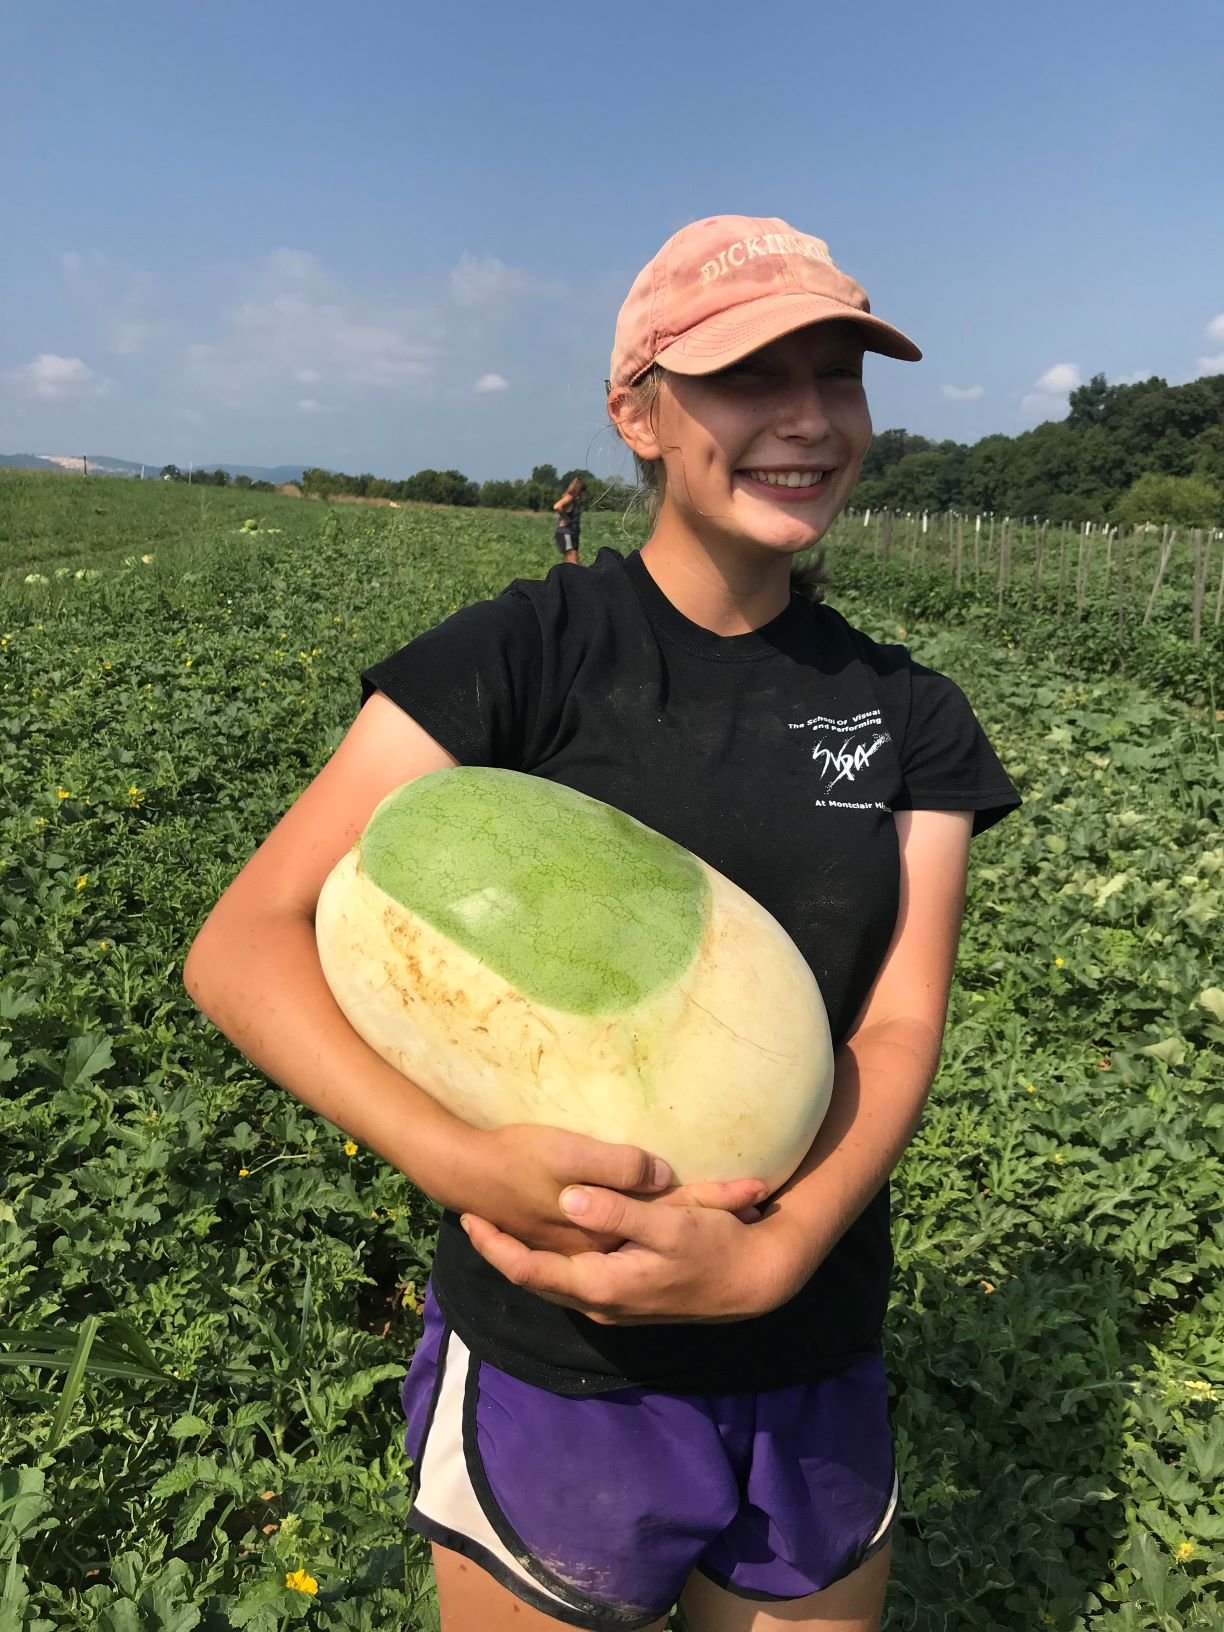 Next Happening: Tuesday CSA: Dickinson College Farm Field Notes for Week of August 5th